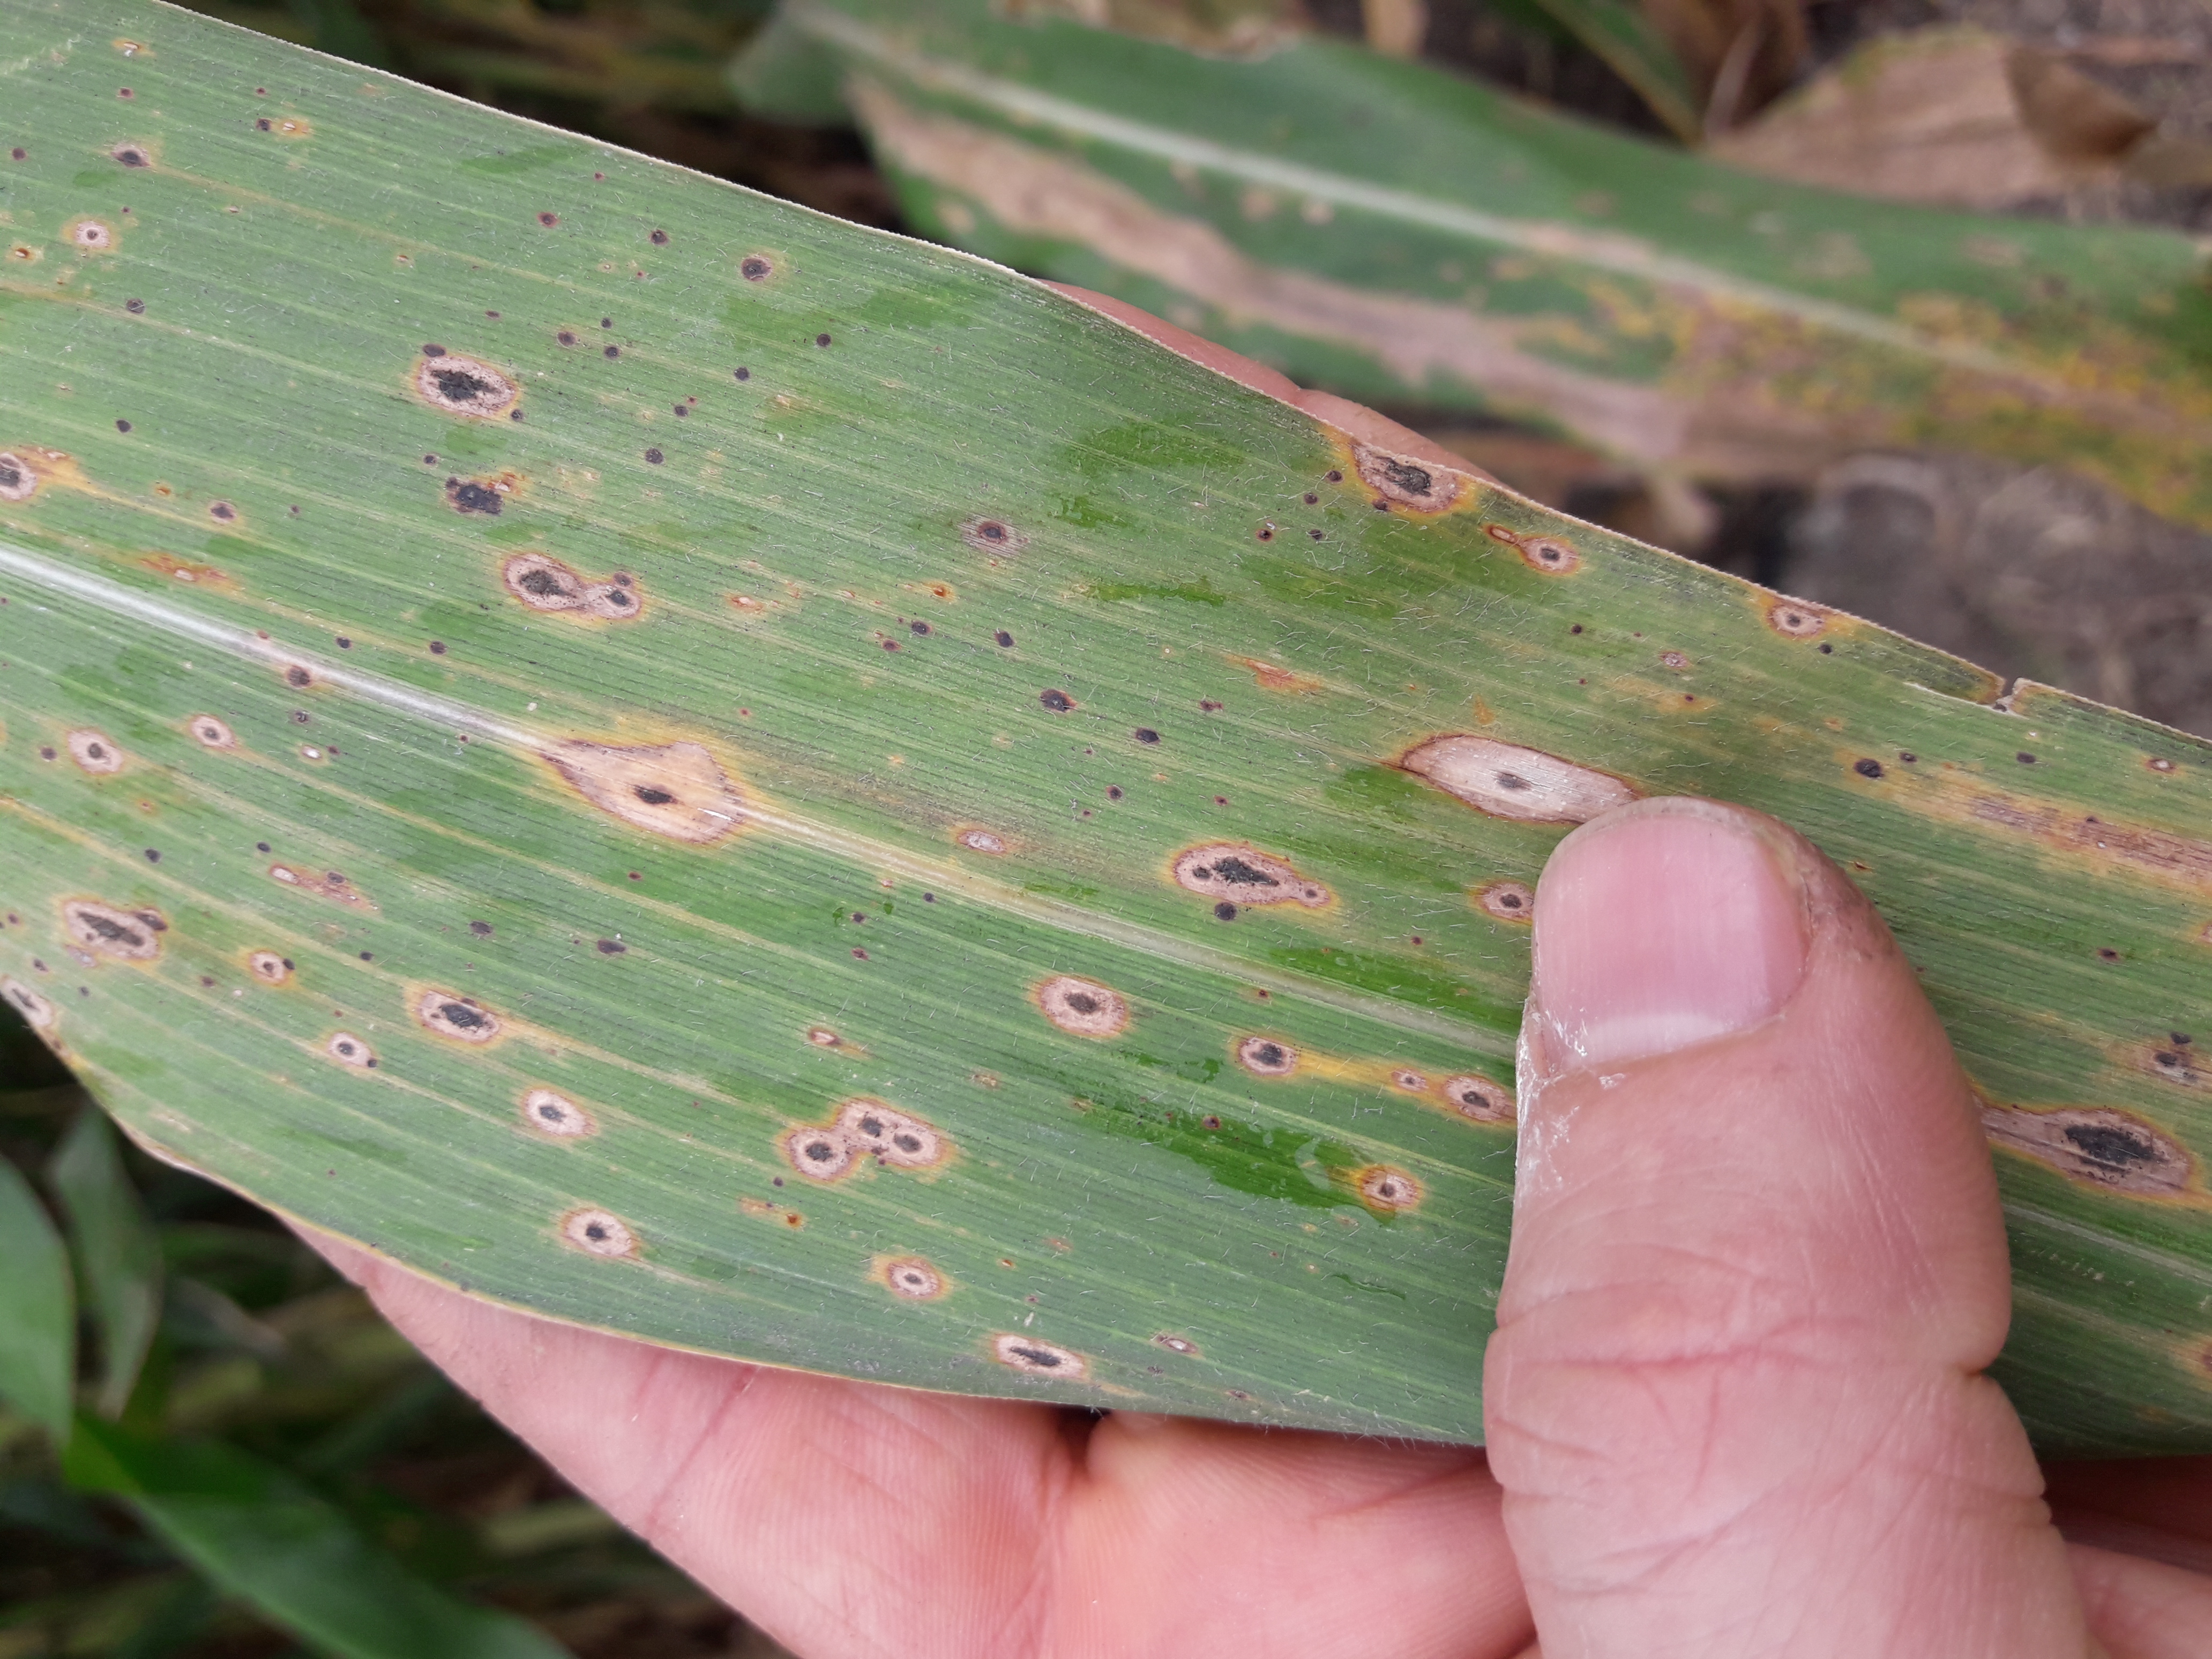 Caused by the interaction of two fungal pathogens that thrive in warm, humid conditions, tar spot complex is diagnosed by the telltale black spots that cover infected plants. (Photo: Alexander Loladze/CIMMYT)